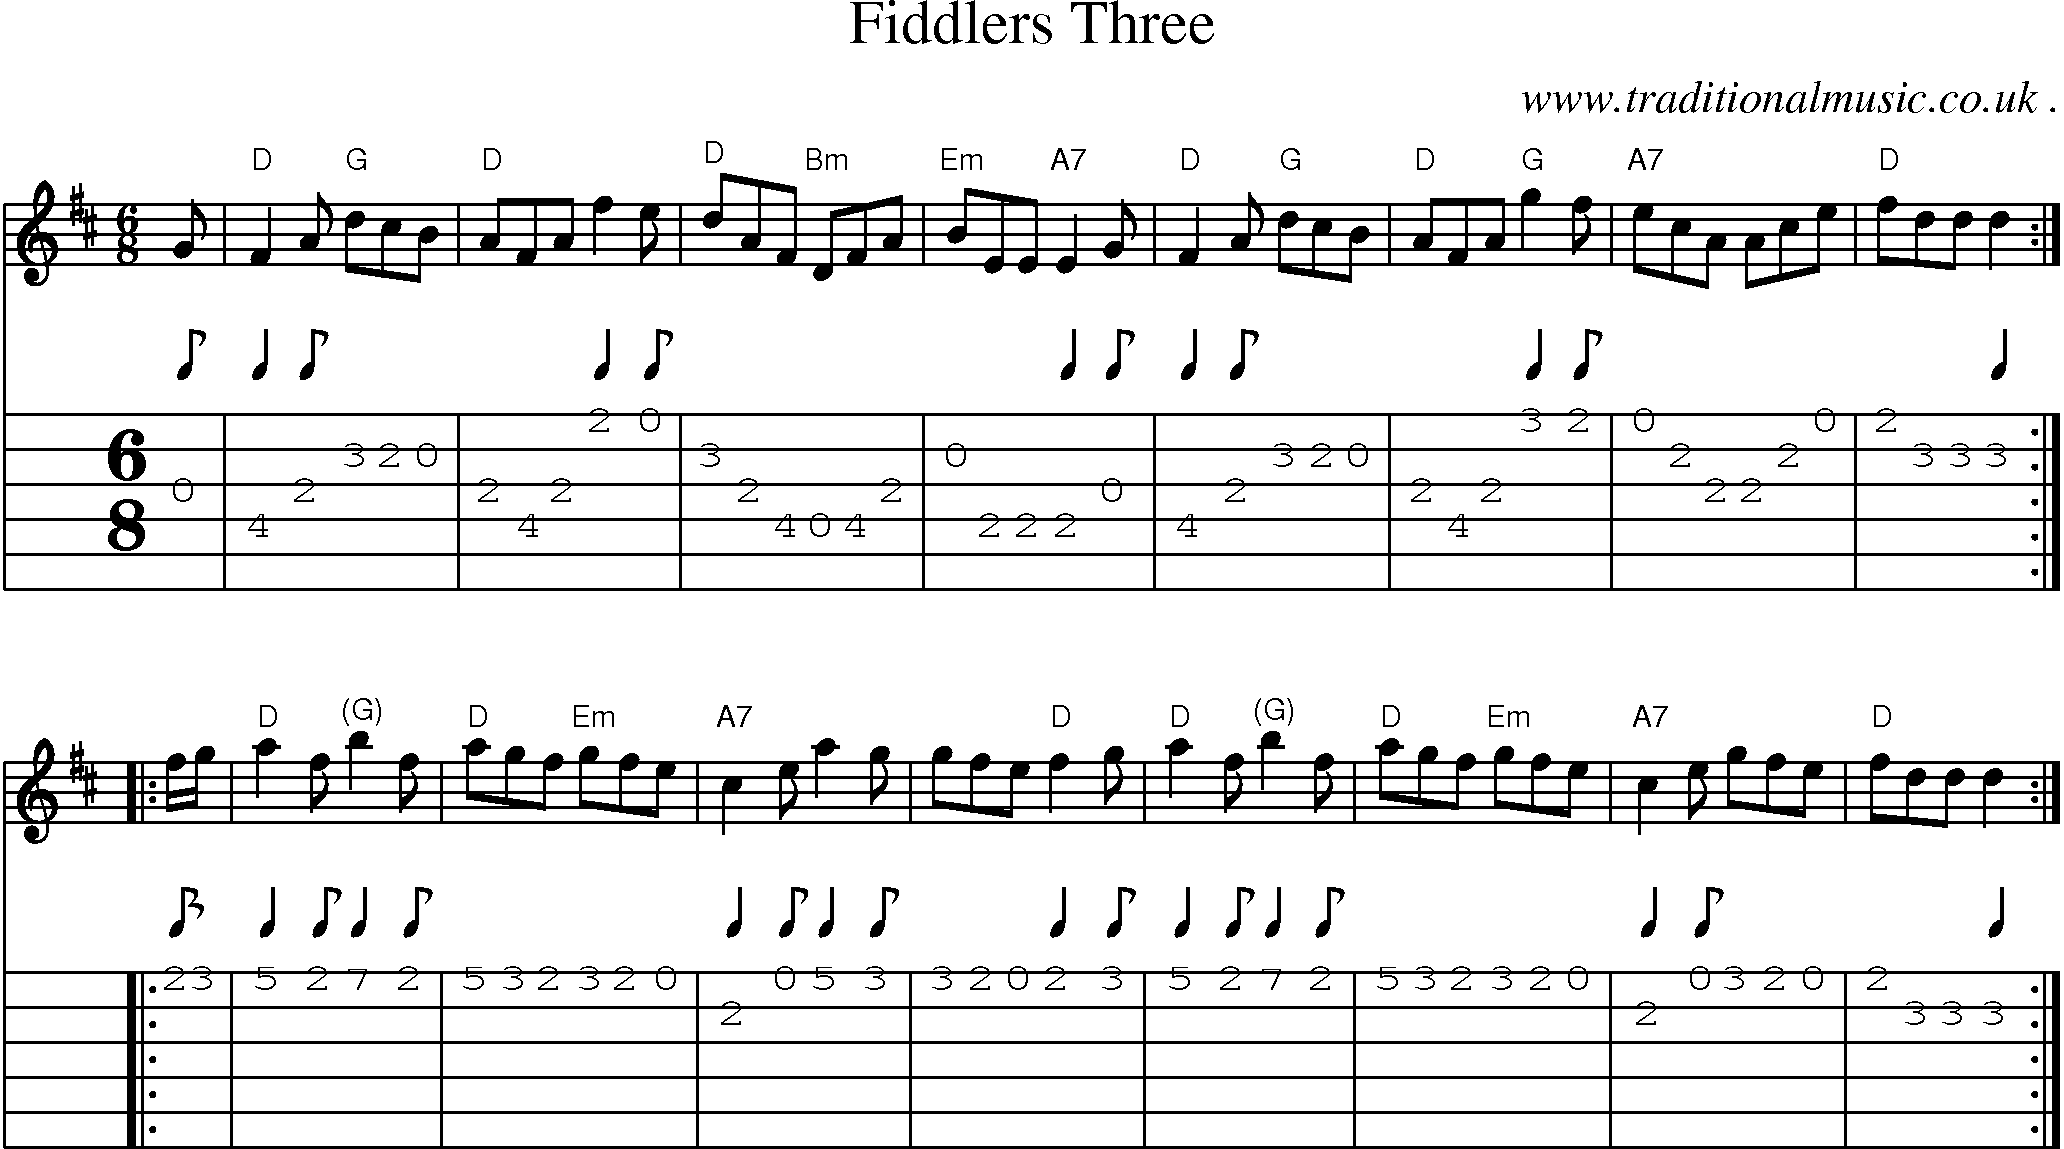 Sheet-music  score, Chords and Guitar Tabs for Fiddlers Three